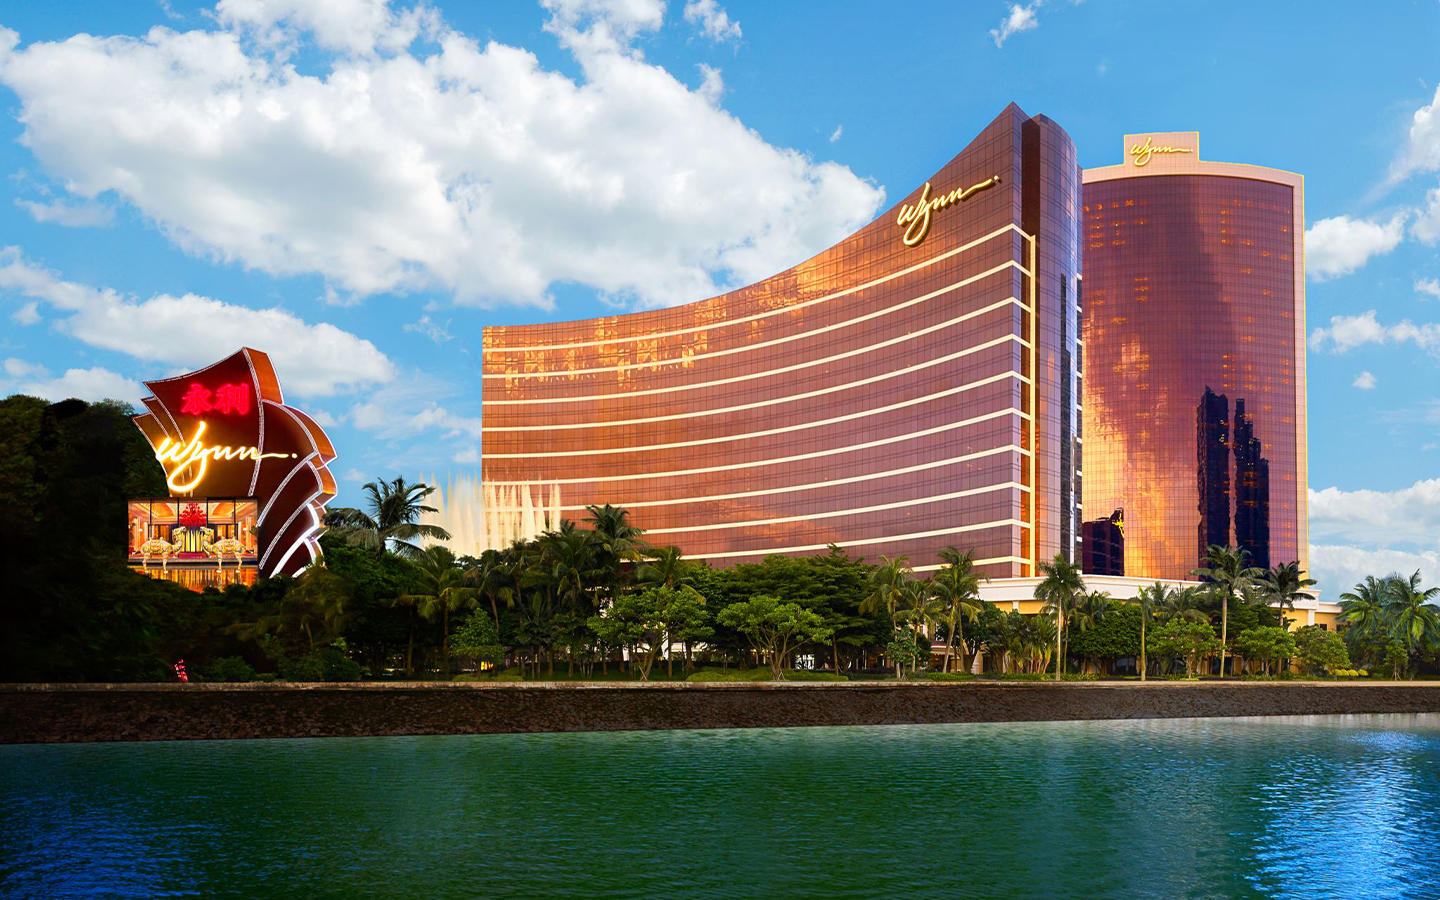 Wynn Macau’s loss in previous quarter rise by 43.6% year-on-year to US$181.2 million